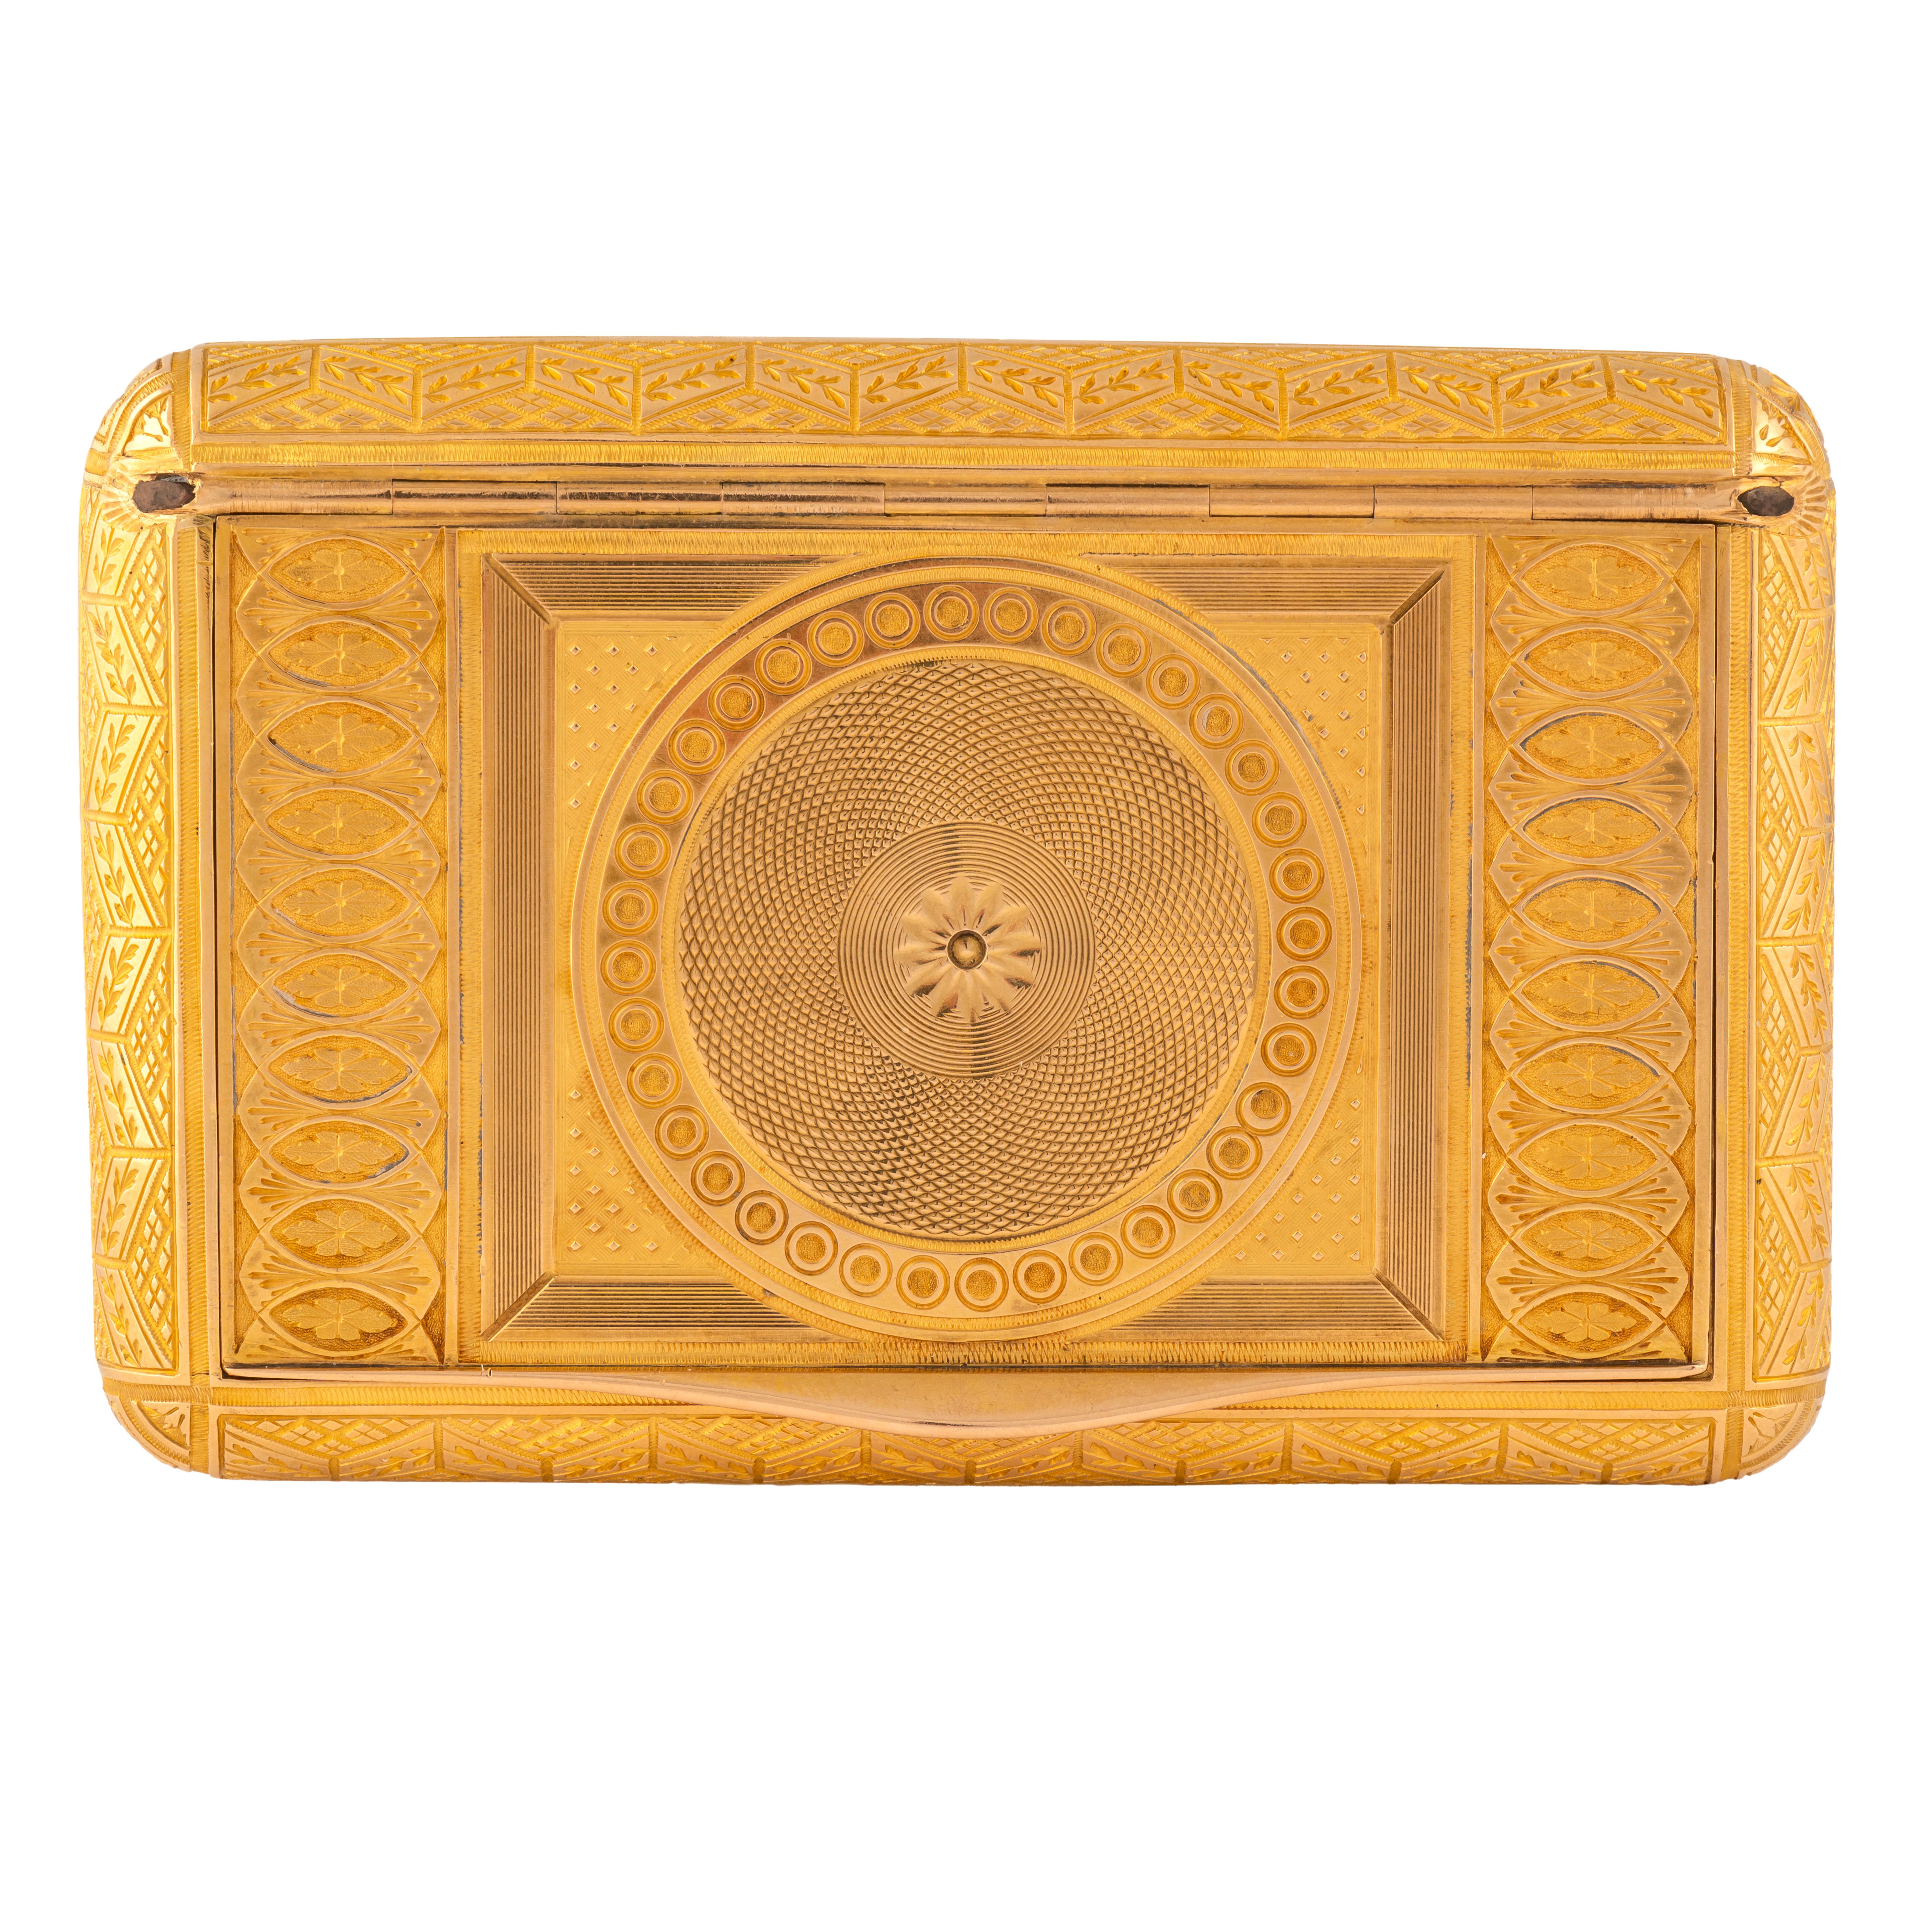 Russian Imperial-era Gold Snuff Box by Keibel, St. Petersburg, circa 1820 For Sale 2